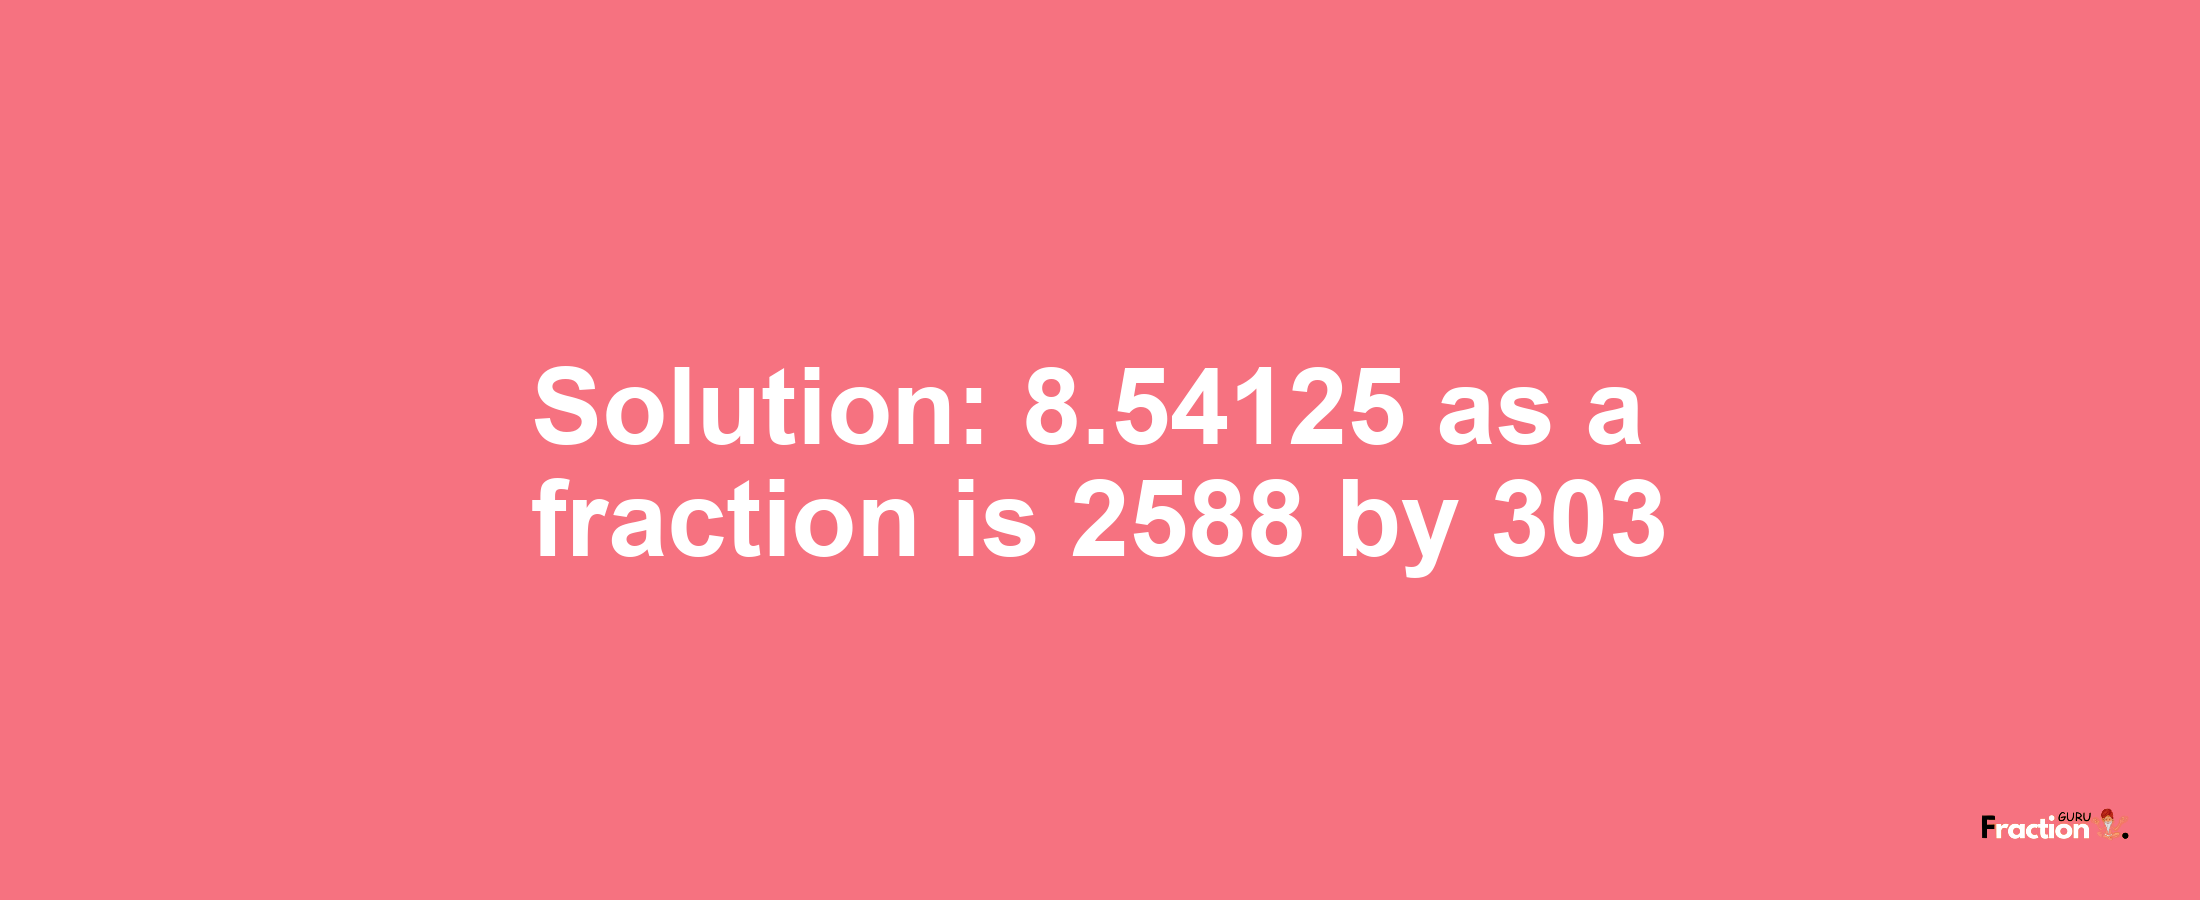 Solution:8.54125 as a fraction is 2588/303